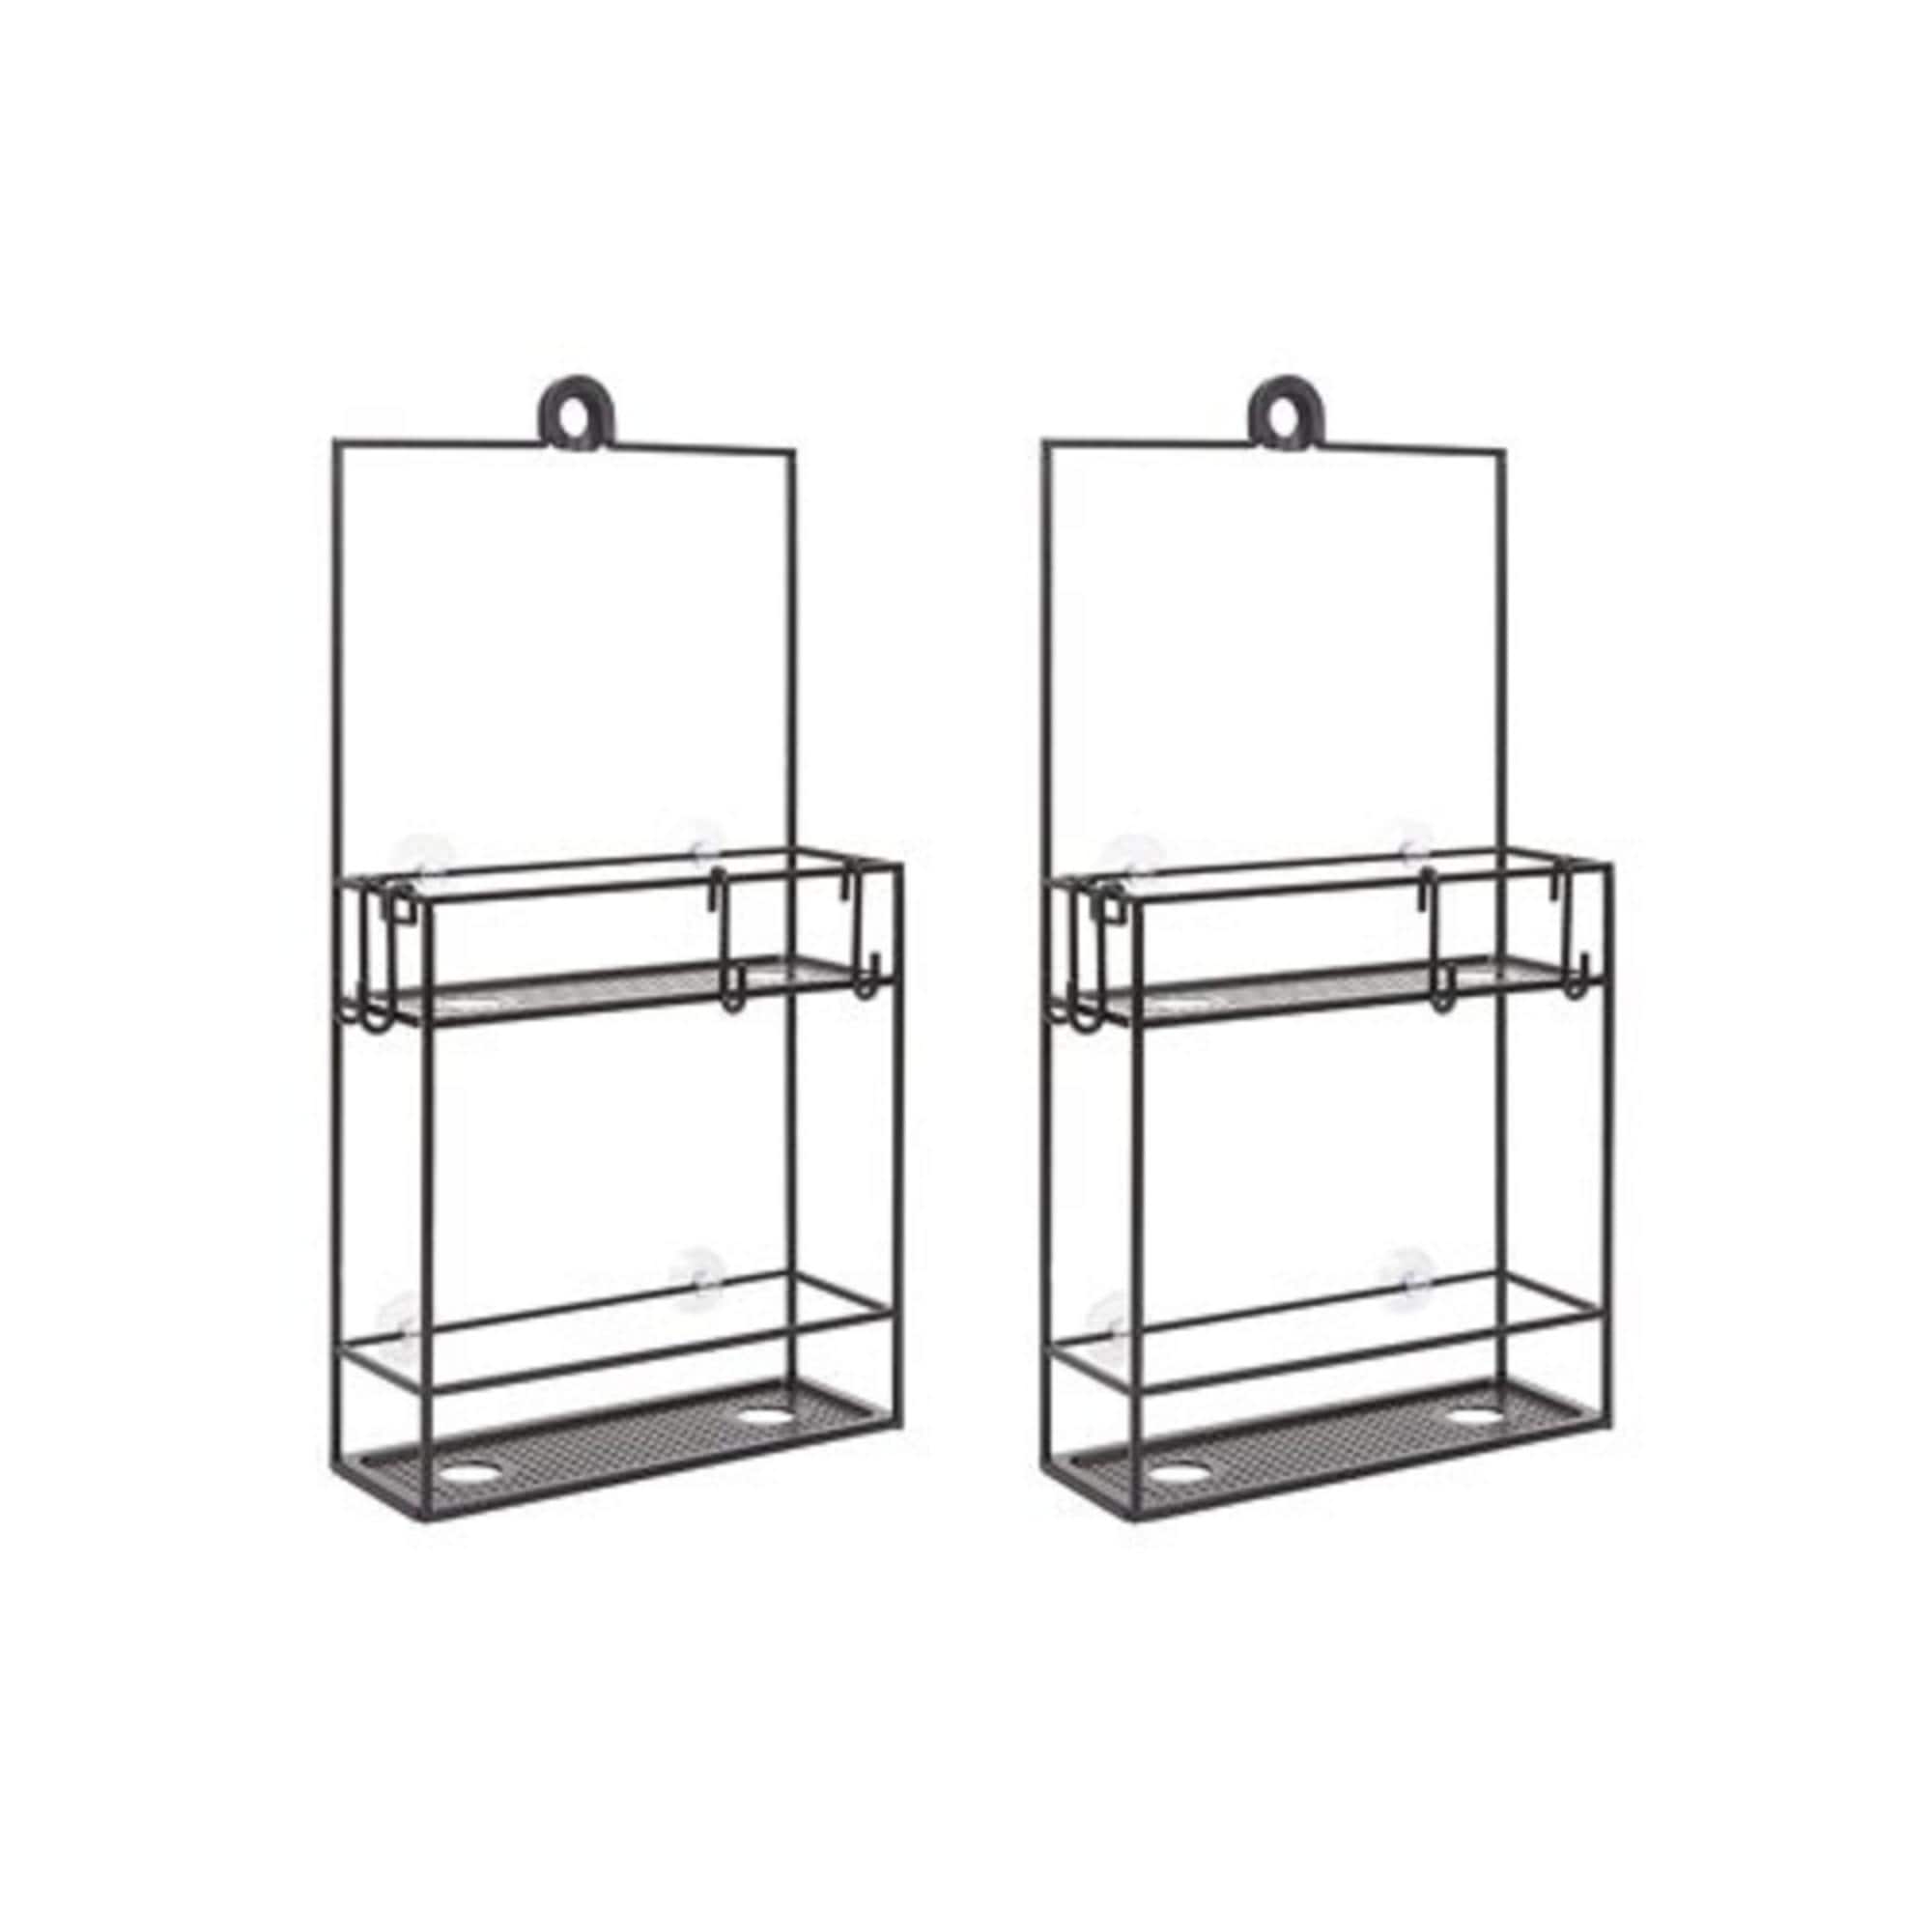 https://ak1.ostkcdn.com/images/products/is/images/direct/c59d2729f61840b24f65a42081185d189b03e4ff/Umbra-Cubiko-Shower-Caddy-%28Black%29-with-Two-Large-Shelves-%282-Pack%29.jpg